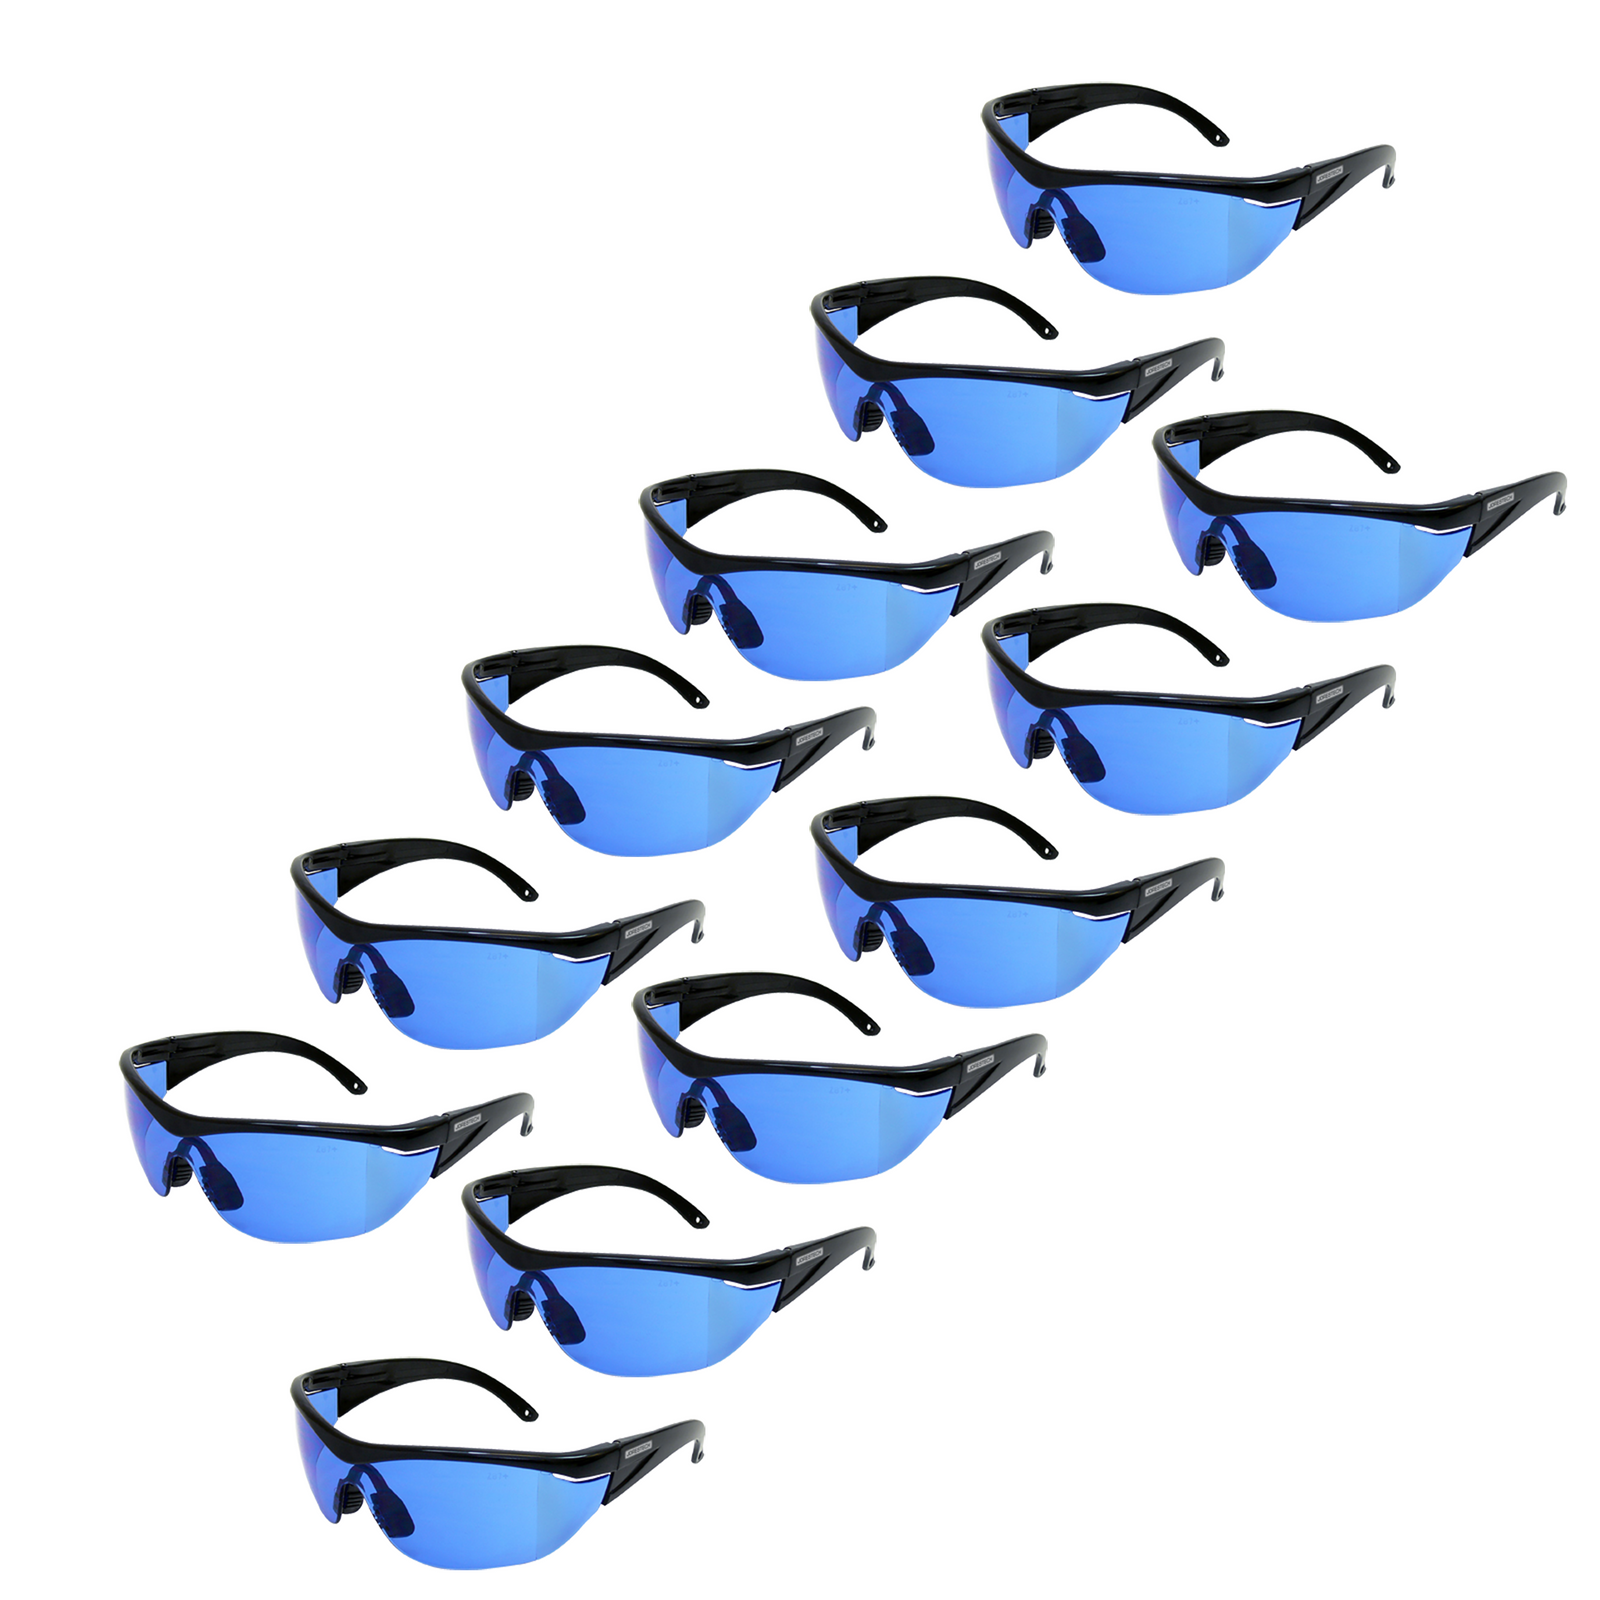 Diagonal view of a pack of 12 modern design framed JORESTECH safety blue glasses with side shields for high impact protection. There is a embedder mark of the polycarbonate glass that reads Z87+ which is the ANSI standard